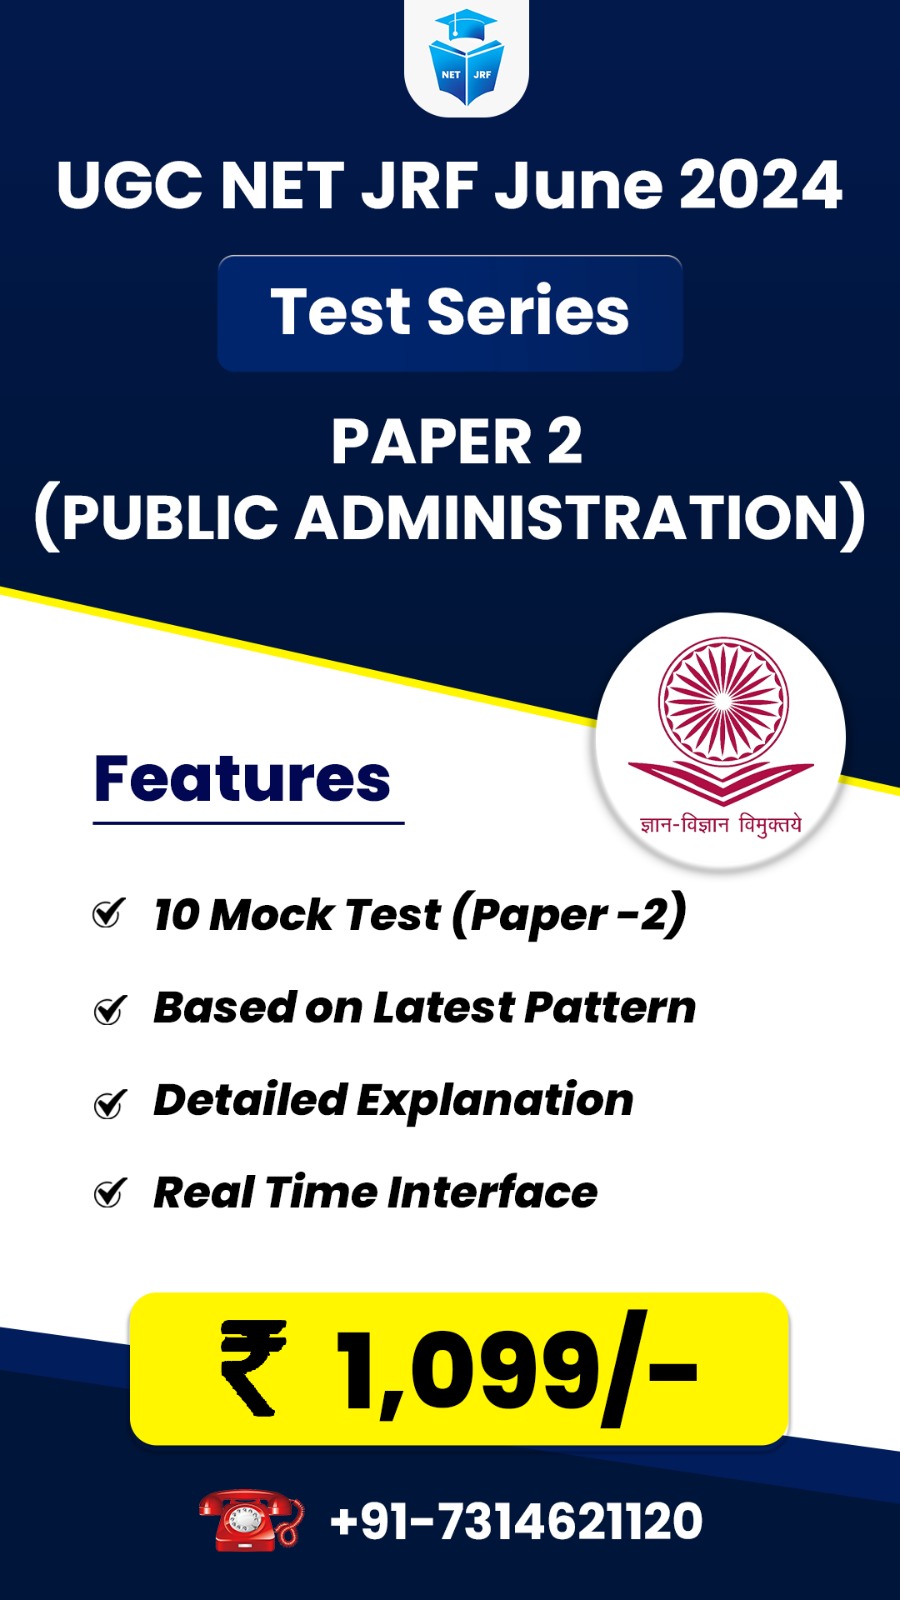 Public Administration (Paper 2) Test Series for June 2024